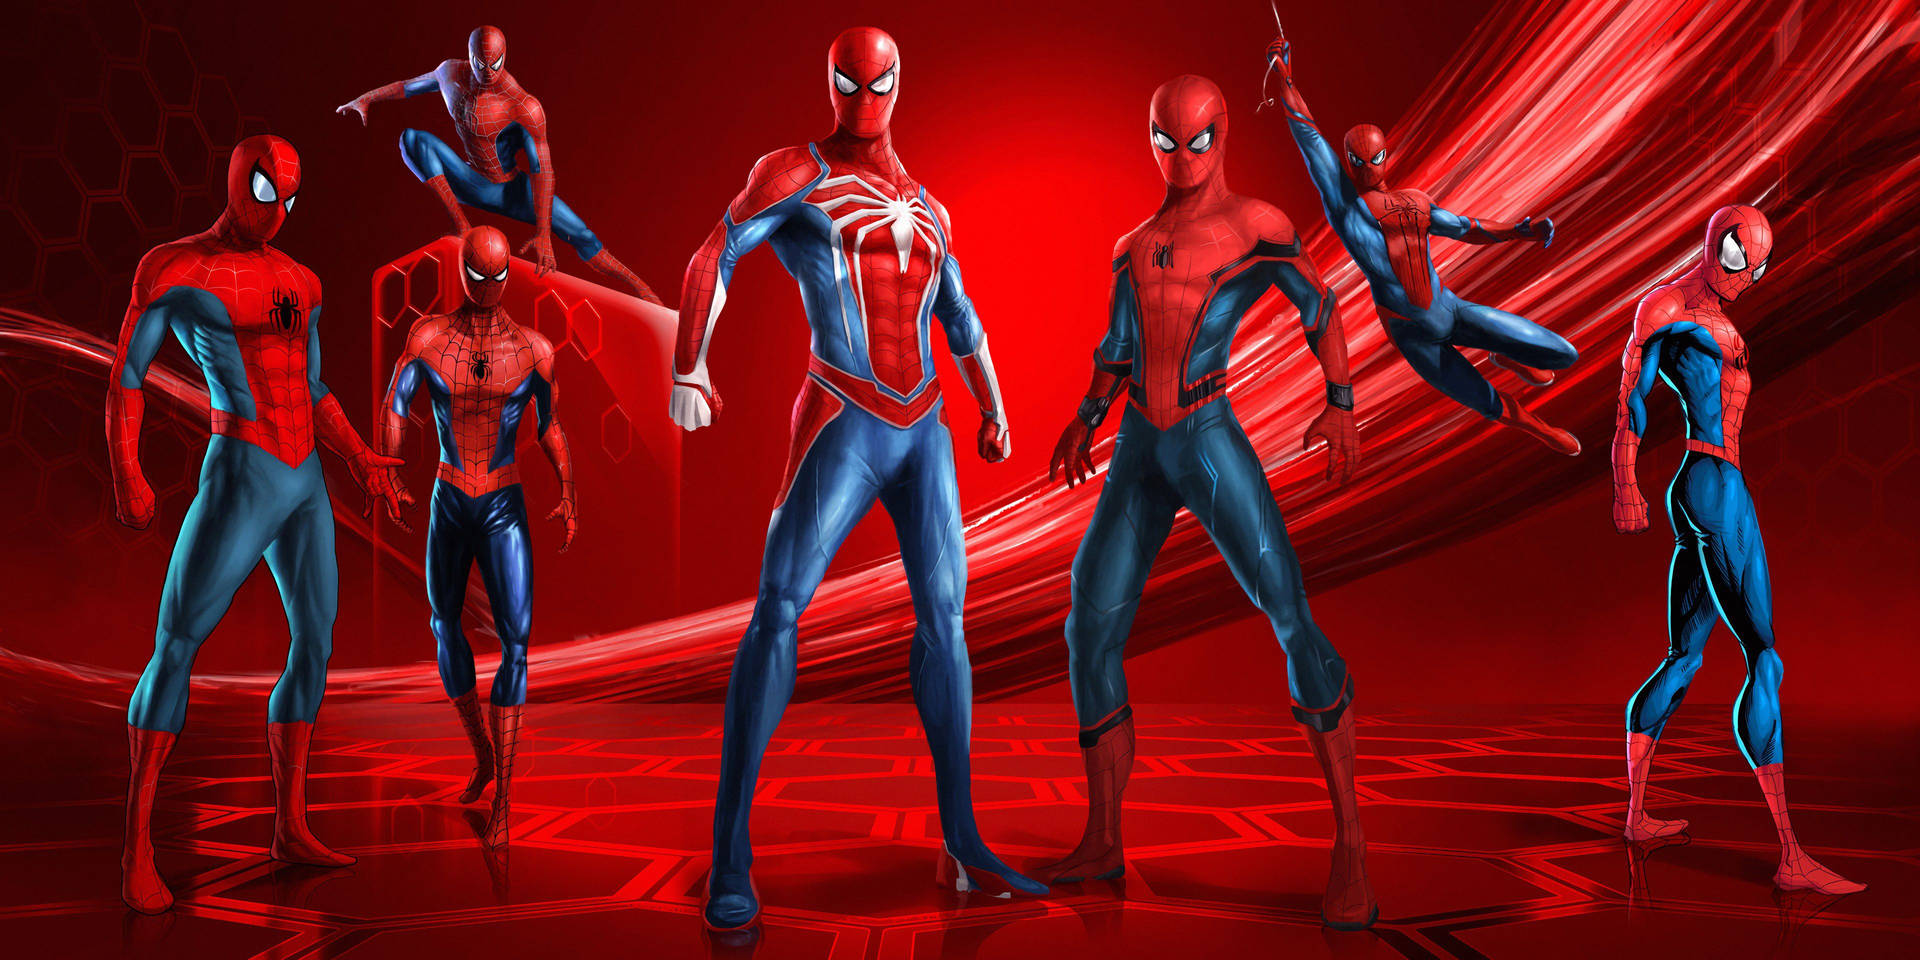 Multiple standing and hanging Spiderman in a red background, Marvel superheroes.